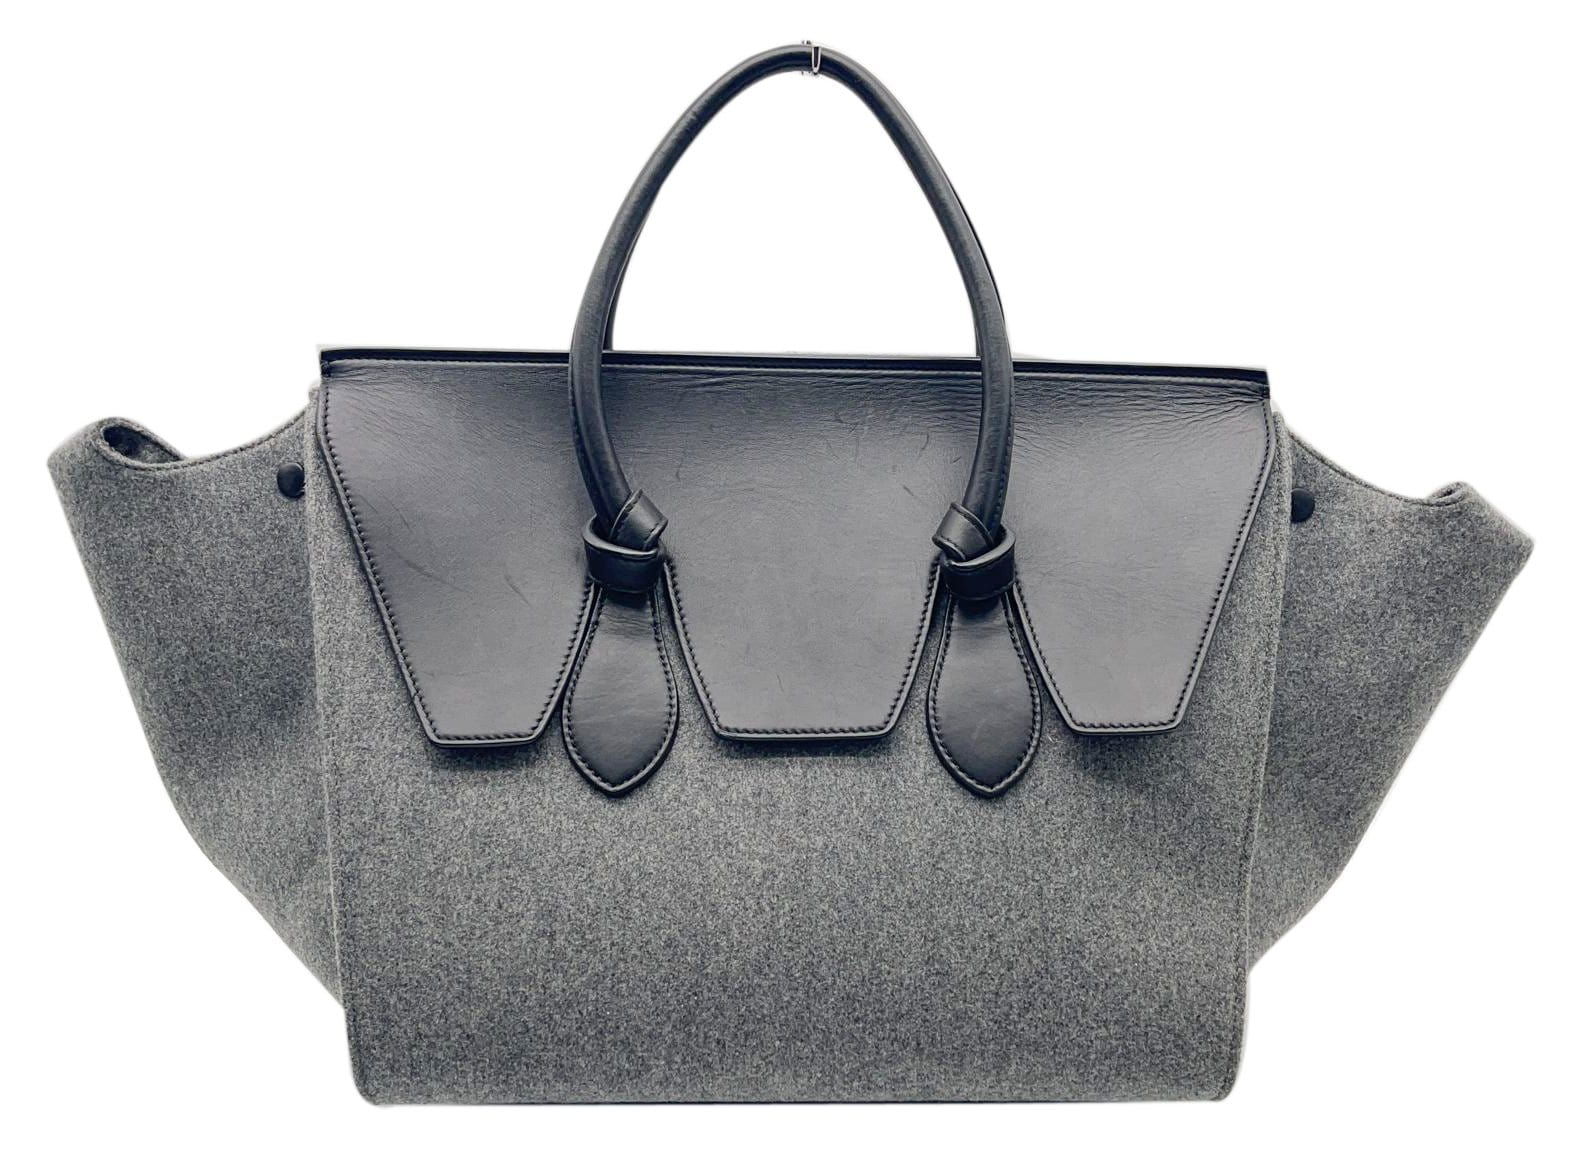 Celine Tote going for $670 at Saks… quality and brand of bag a